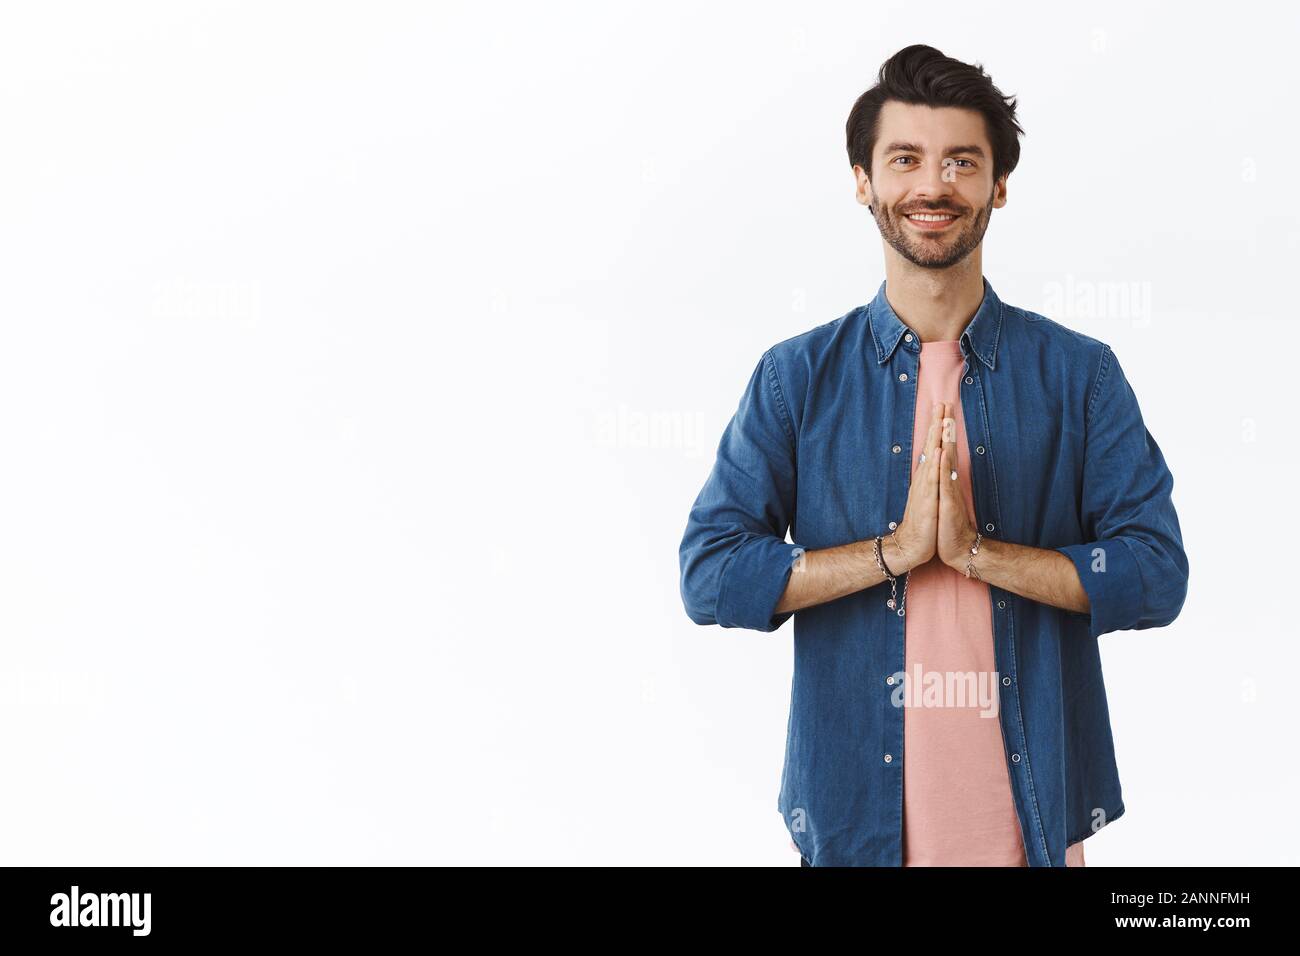 Relieved, happy good-looking relaxed guy practice yoga or meditating, standing straight with hands clasped near chest in namaste gesture, smiling grat Stock Photo